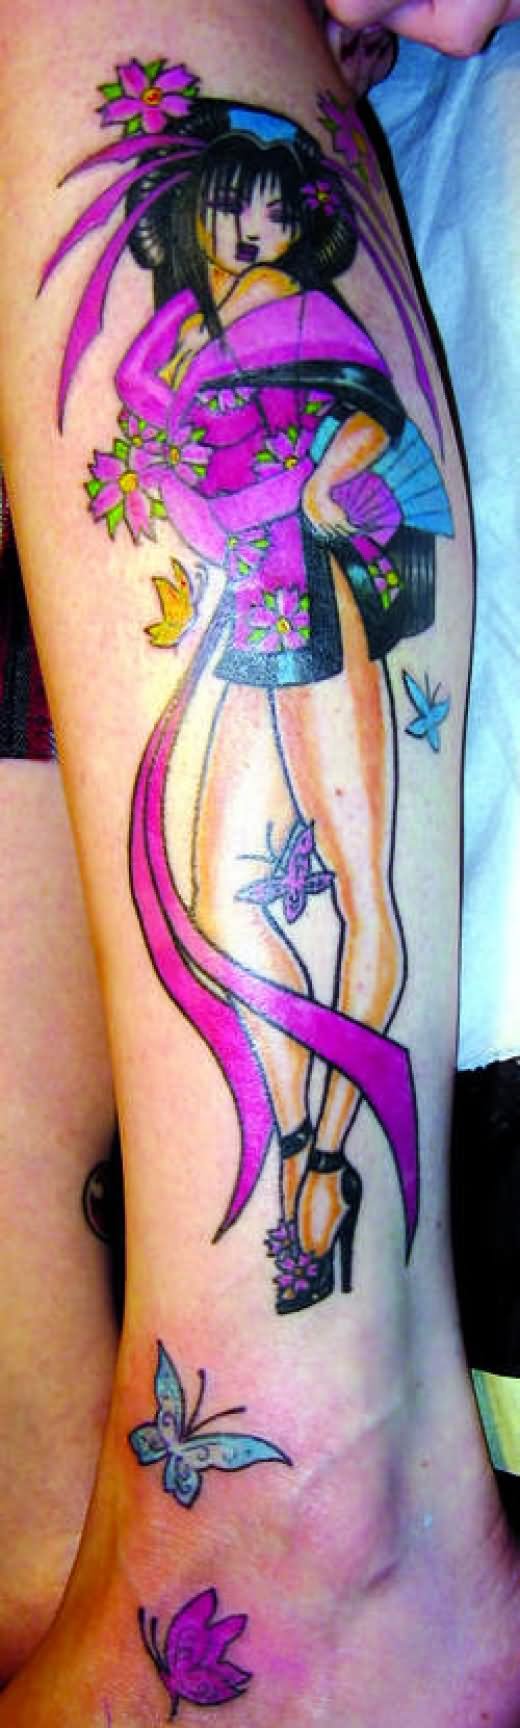 Cute Colorful Pin Up Girl With Flowers And Butterflies Tattoo On Leg